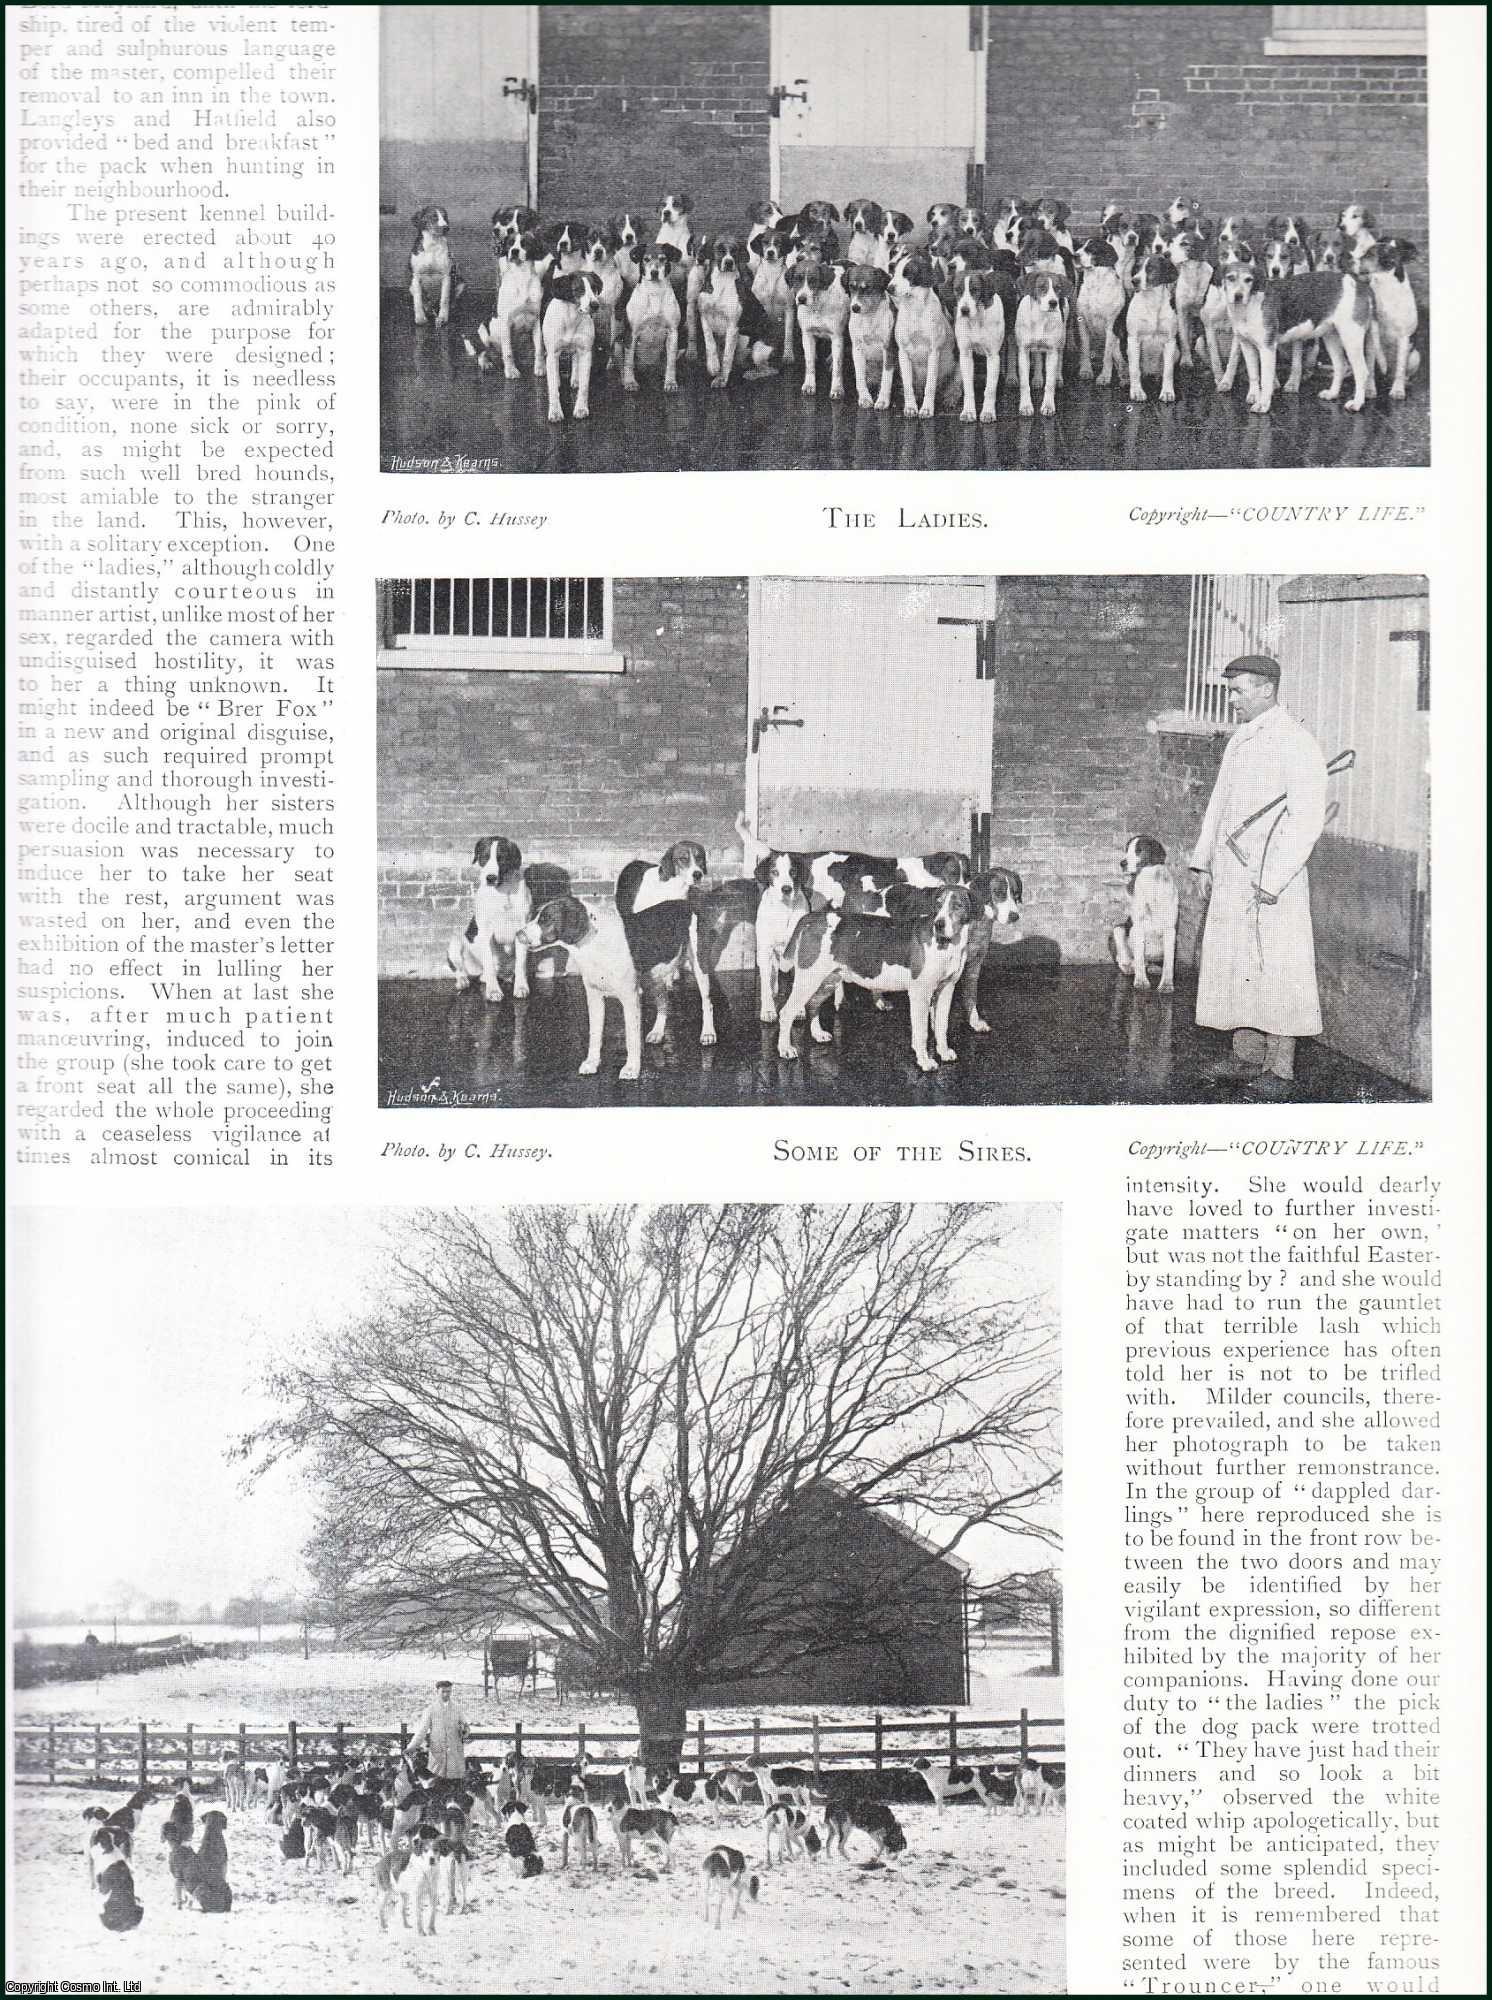 Country Life Magazine - The Essex Hounds. Several pictures and accompanying text, removed from an original issue of Country Life Magazine, 1897.